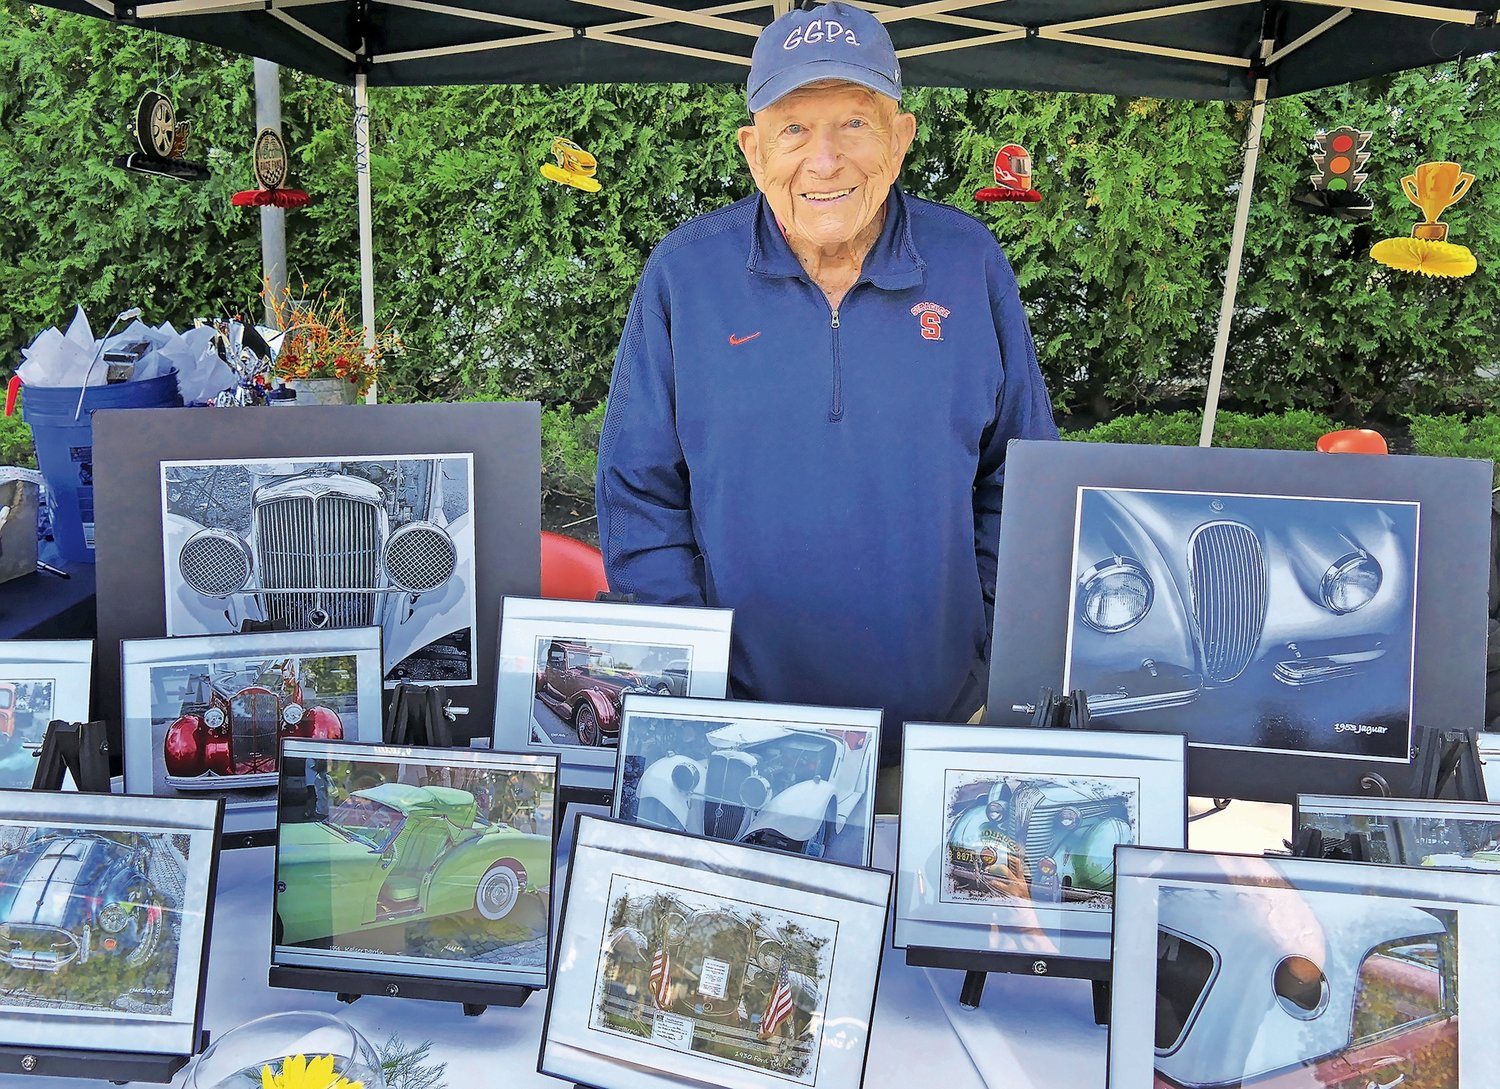 Stanley Mutterperl, a resident living at The Bristal in North Woodmere, has a soft spot for antique cars, having taken dozens of photographs of such vehicles during his lifetime.